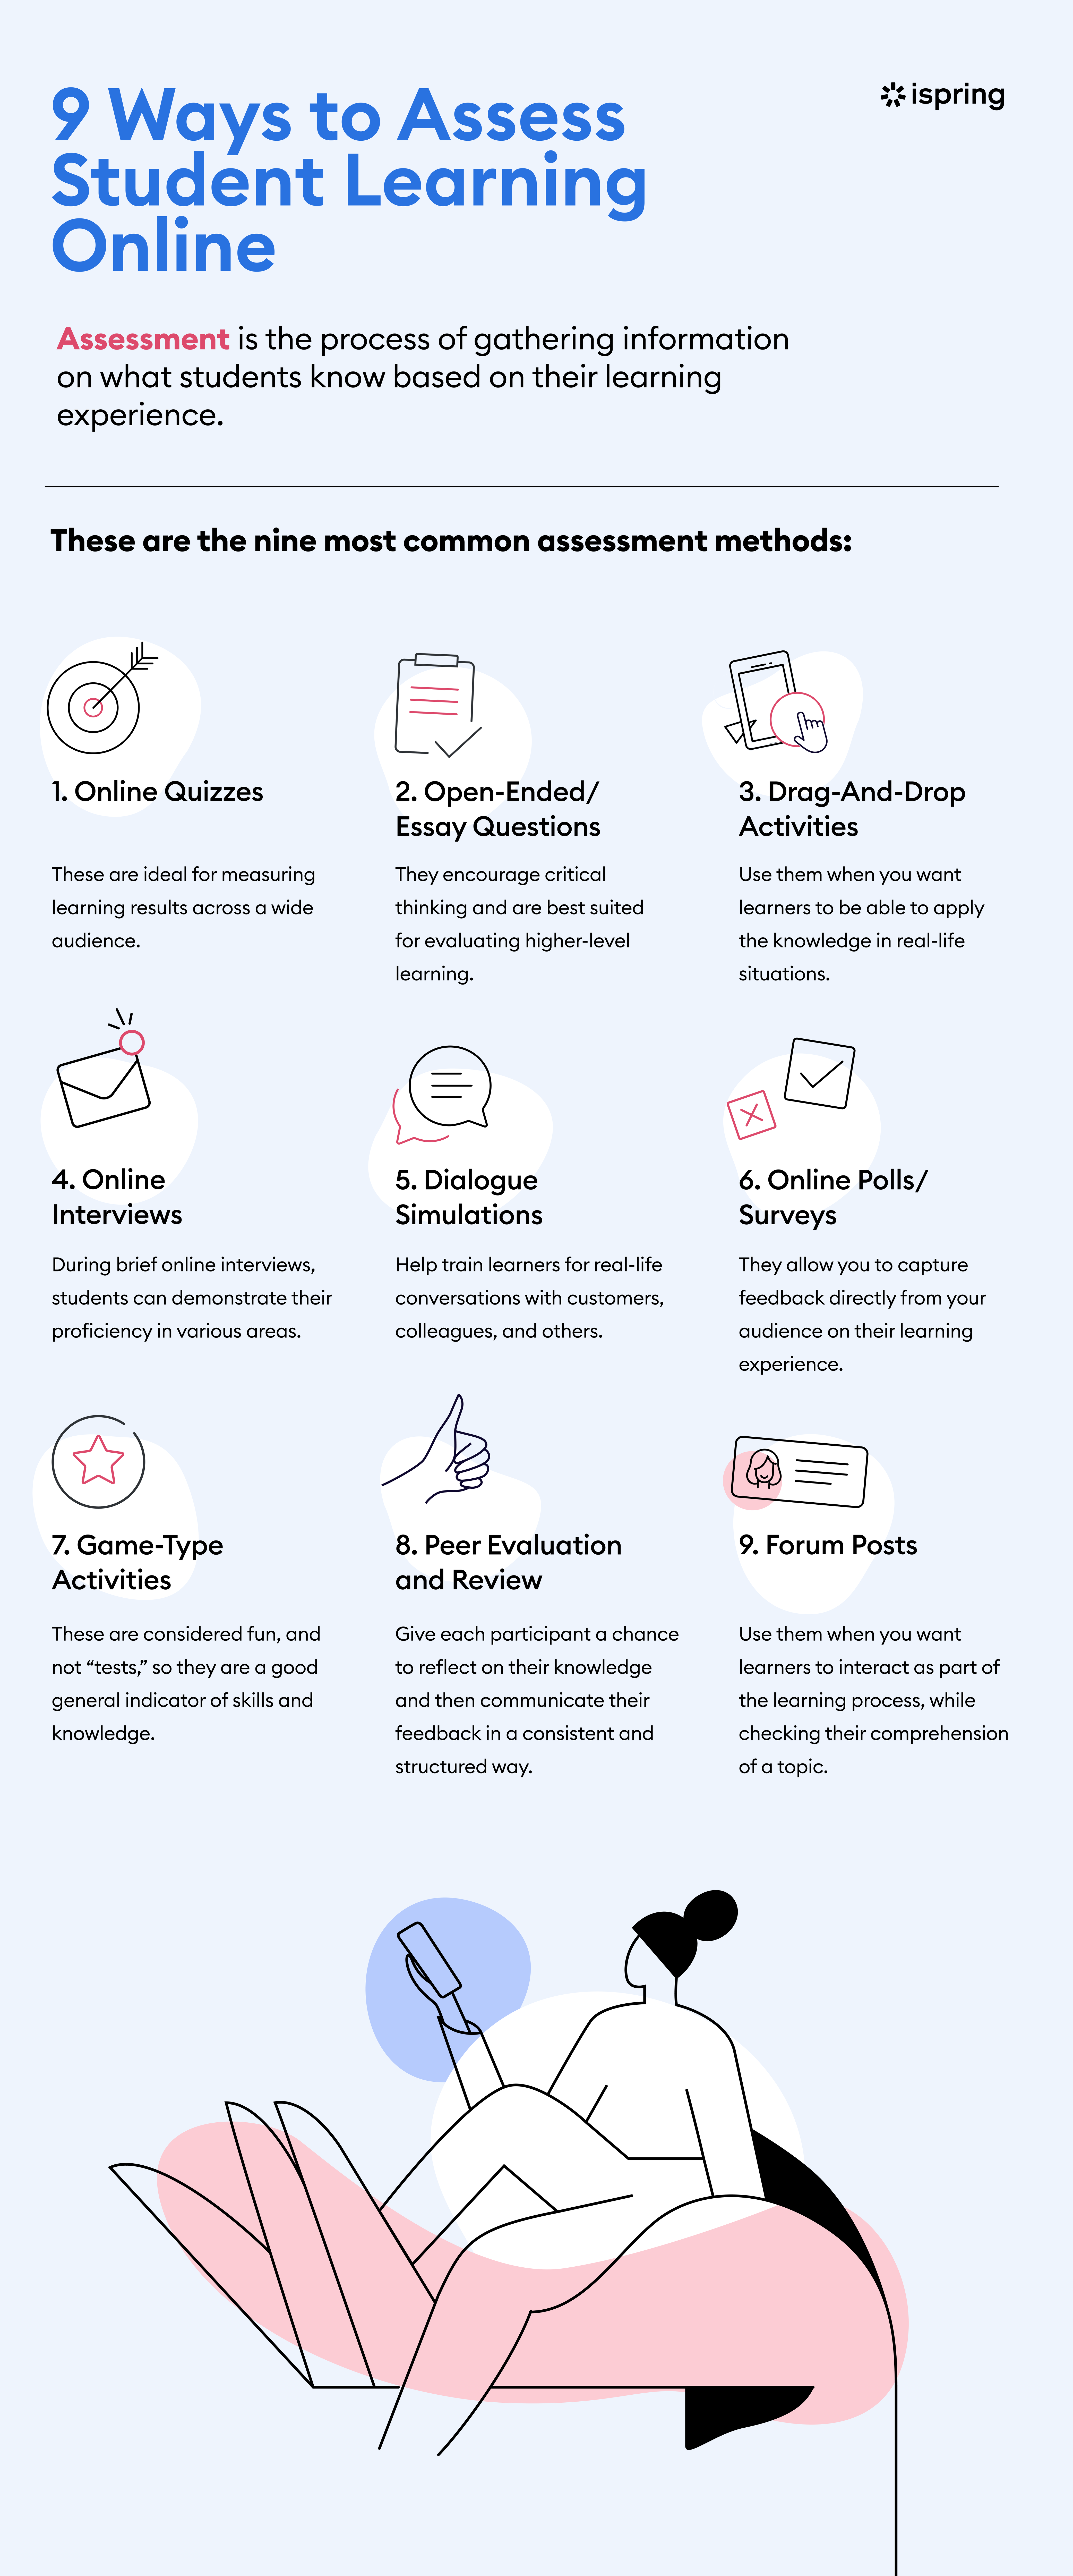 9 Ways to Assess Student Learning Online